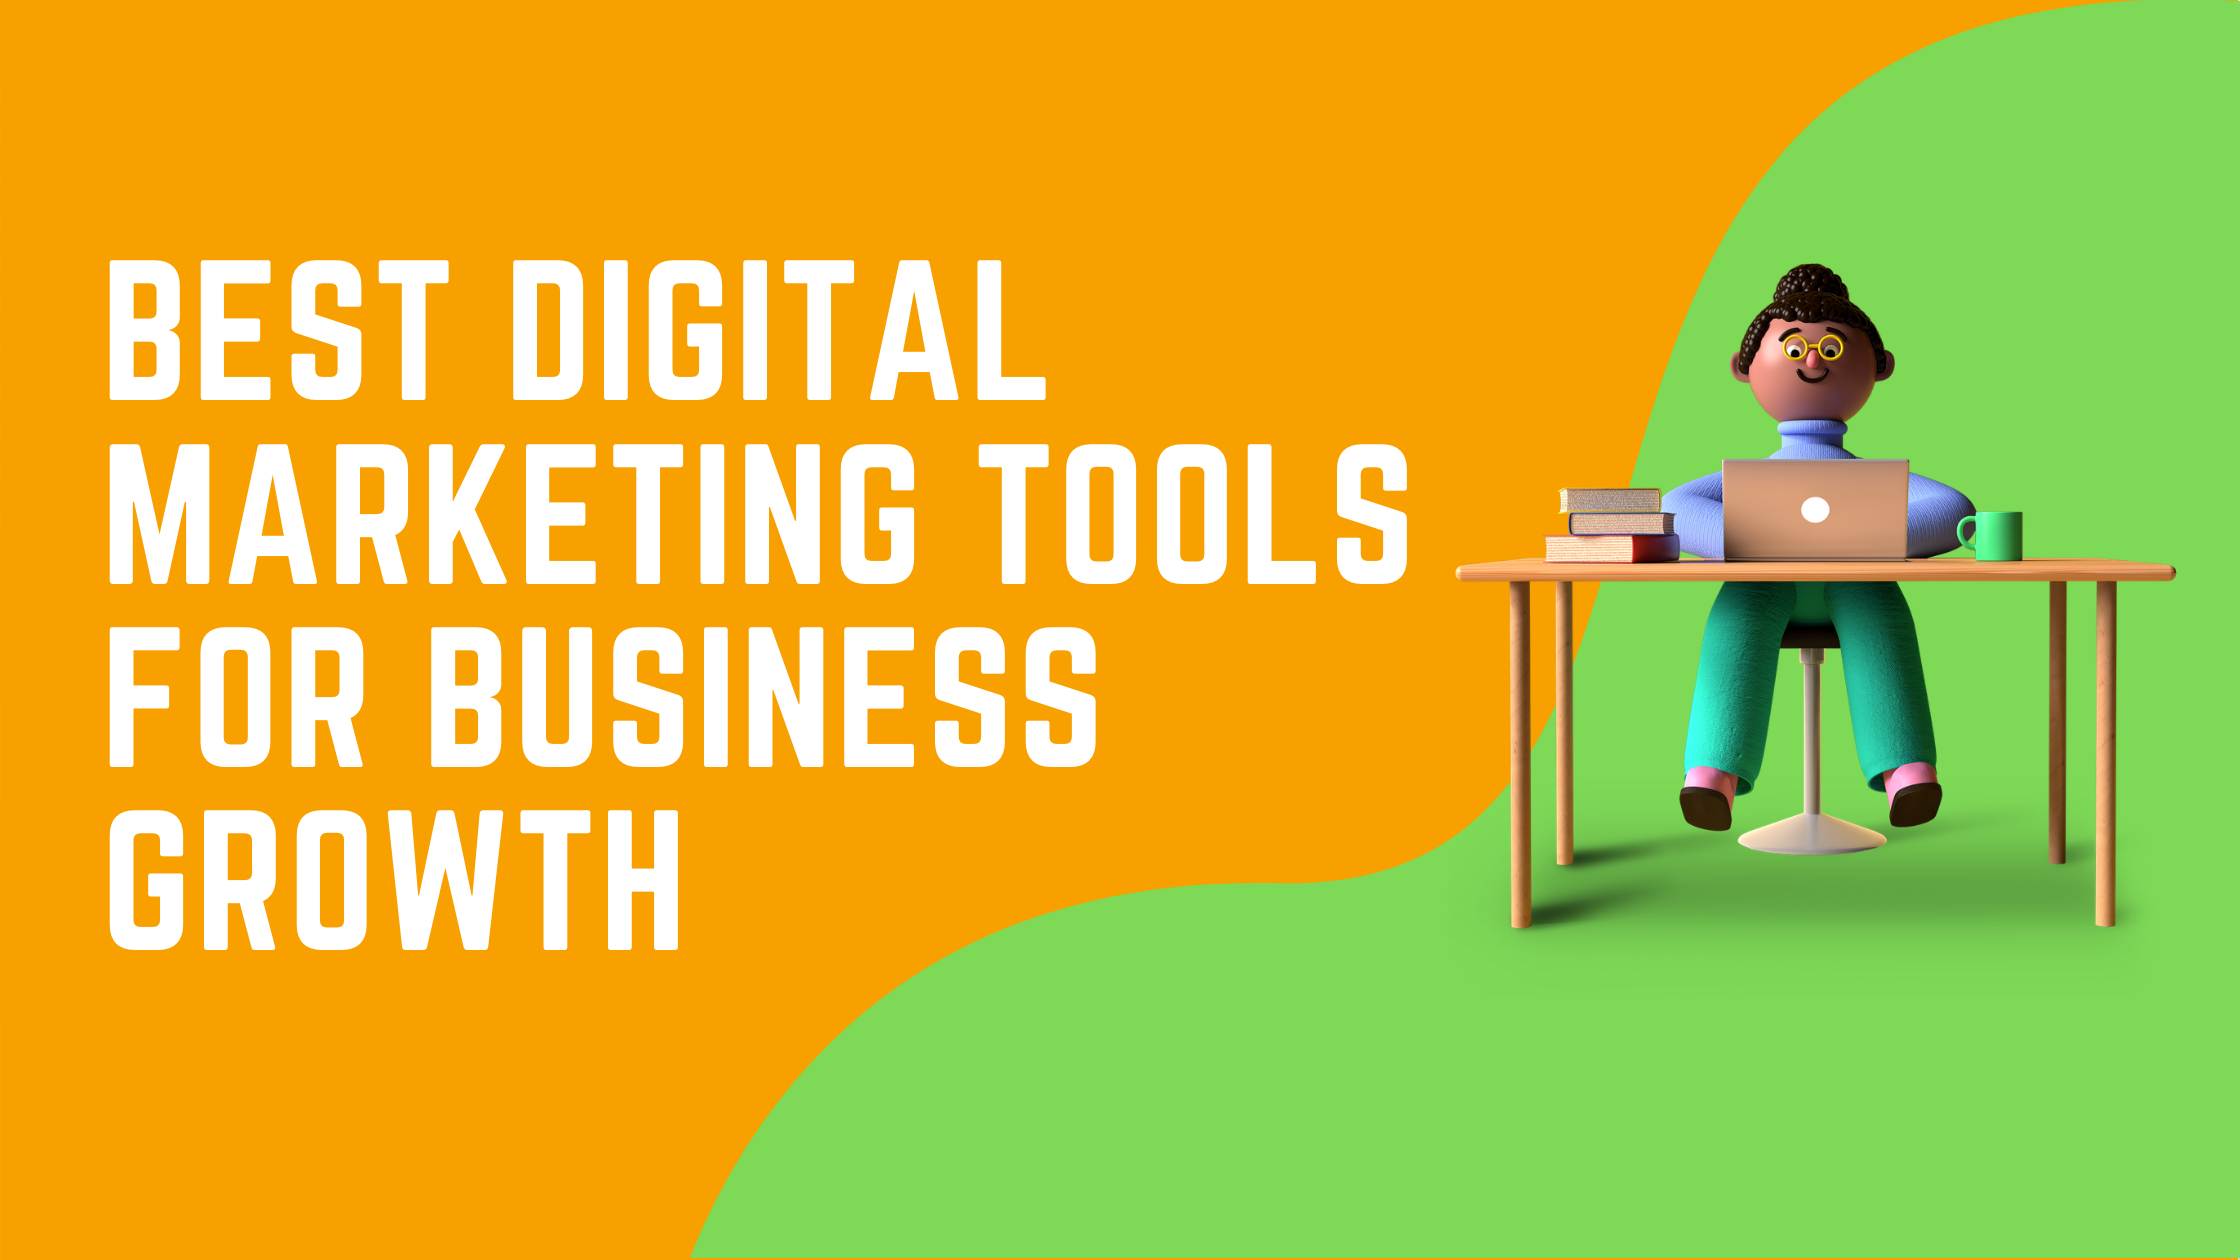 Best Digital Marketing Tools for Business Growth in 2022